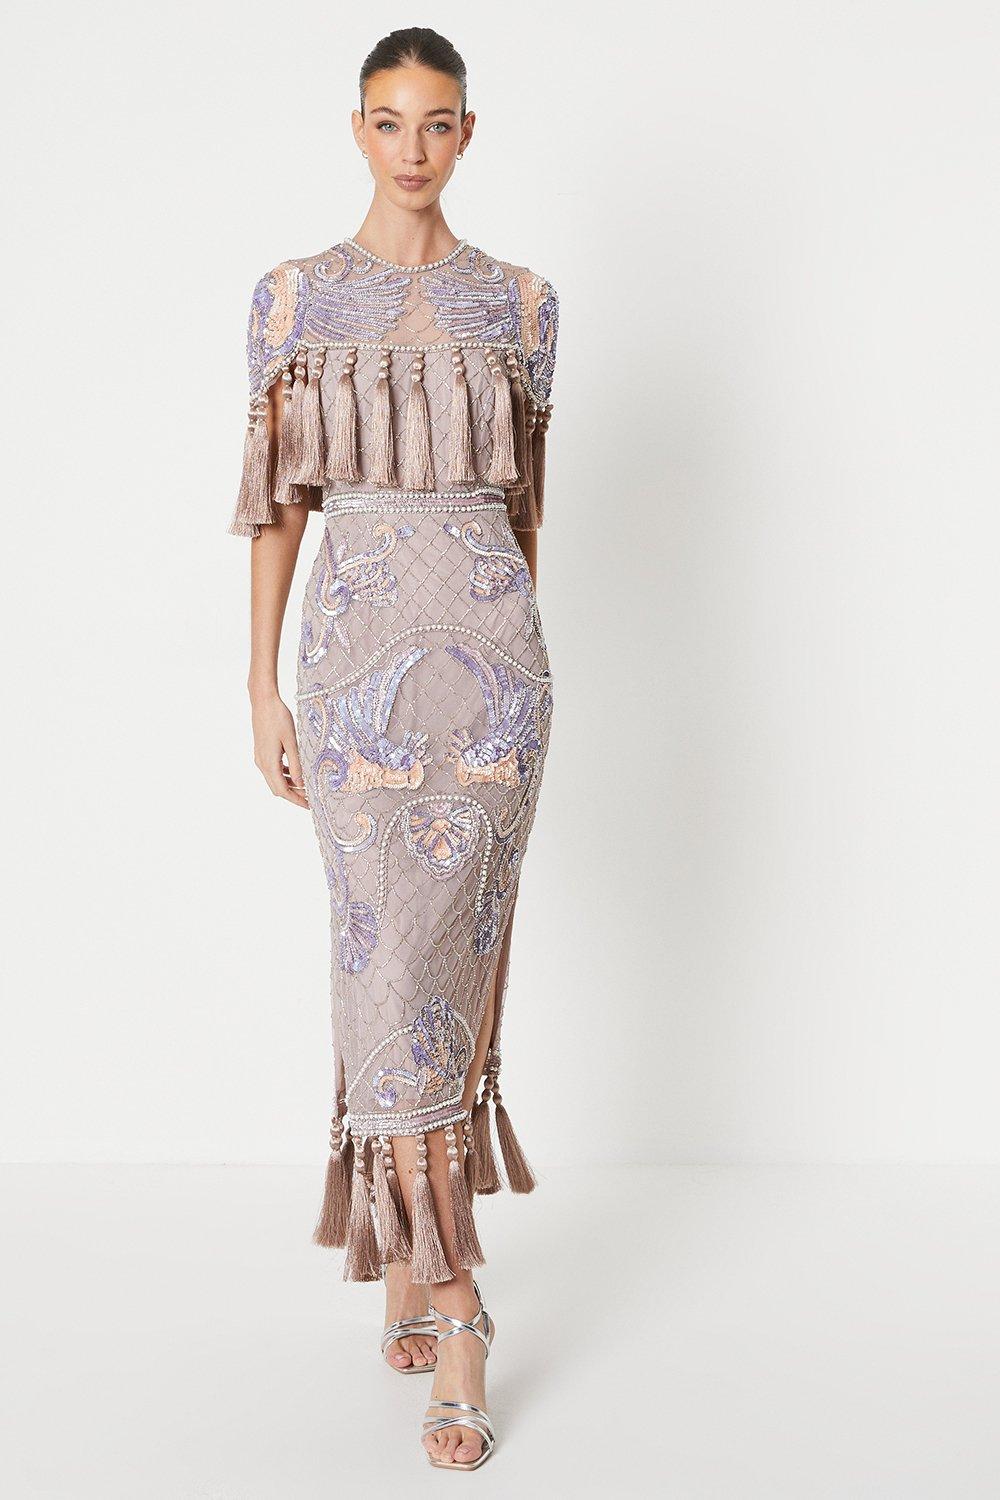 The Collector Hand Embellished Midi Dress With Tassles